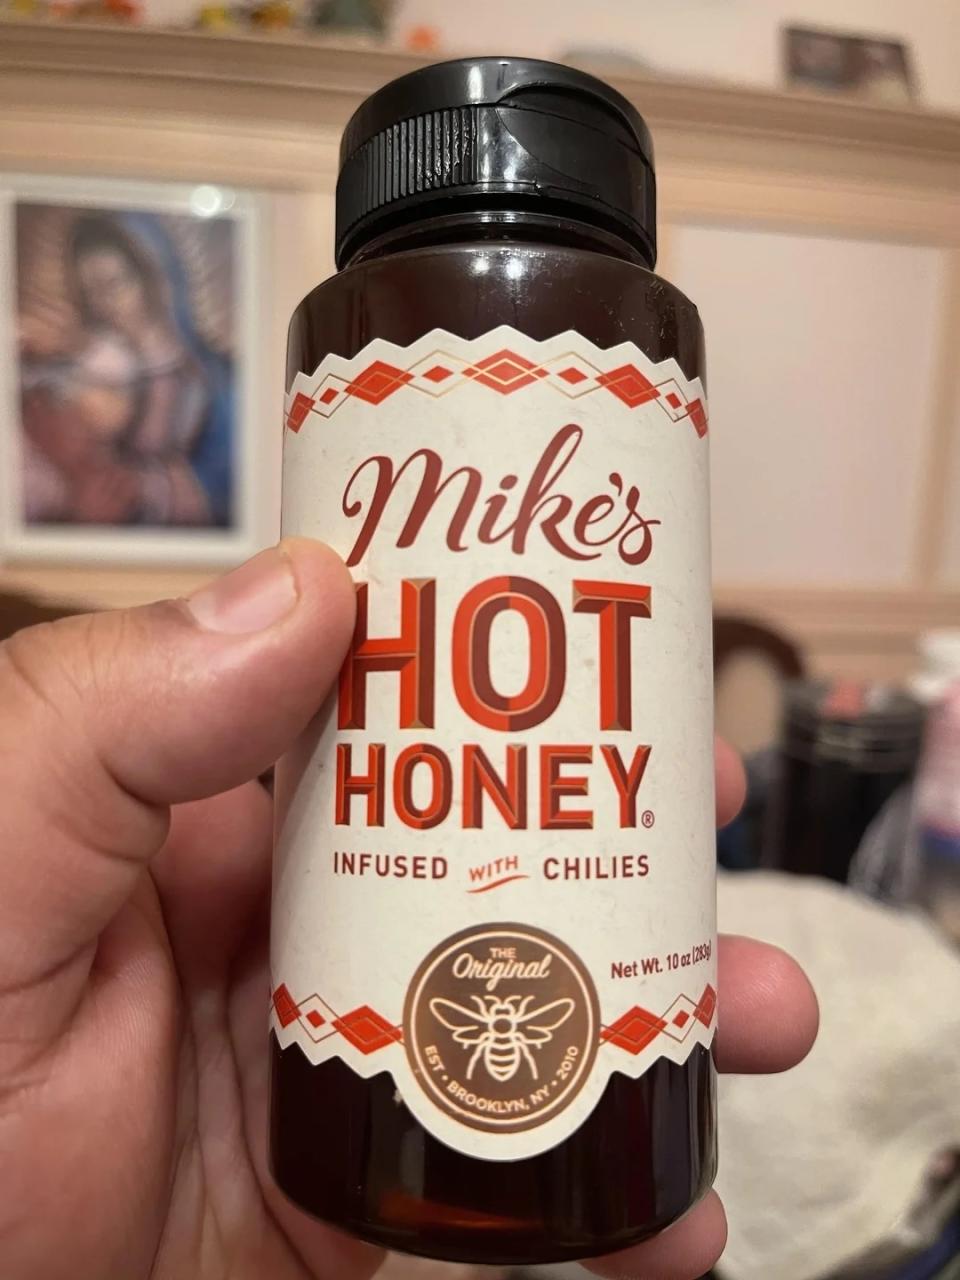 A person holding a bottle of Mike's Hot Honey infused with chilies